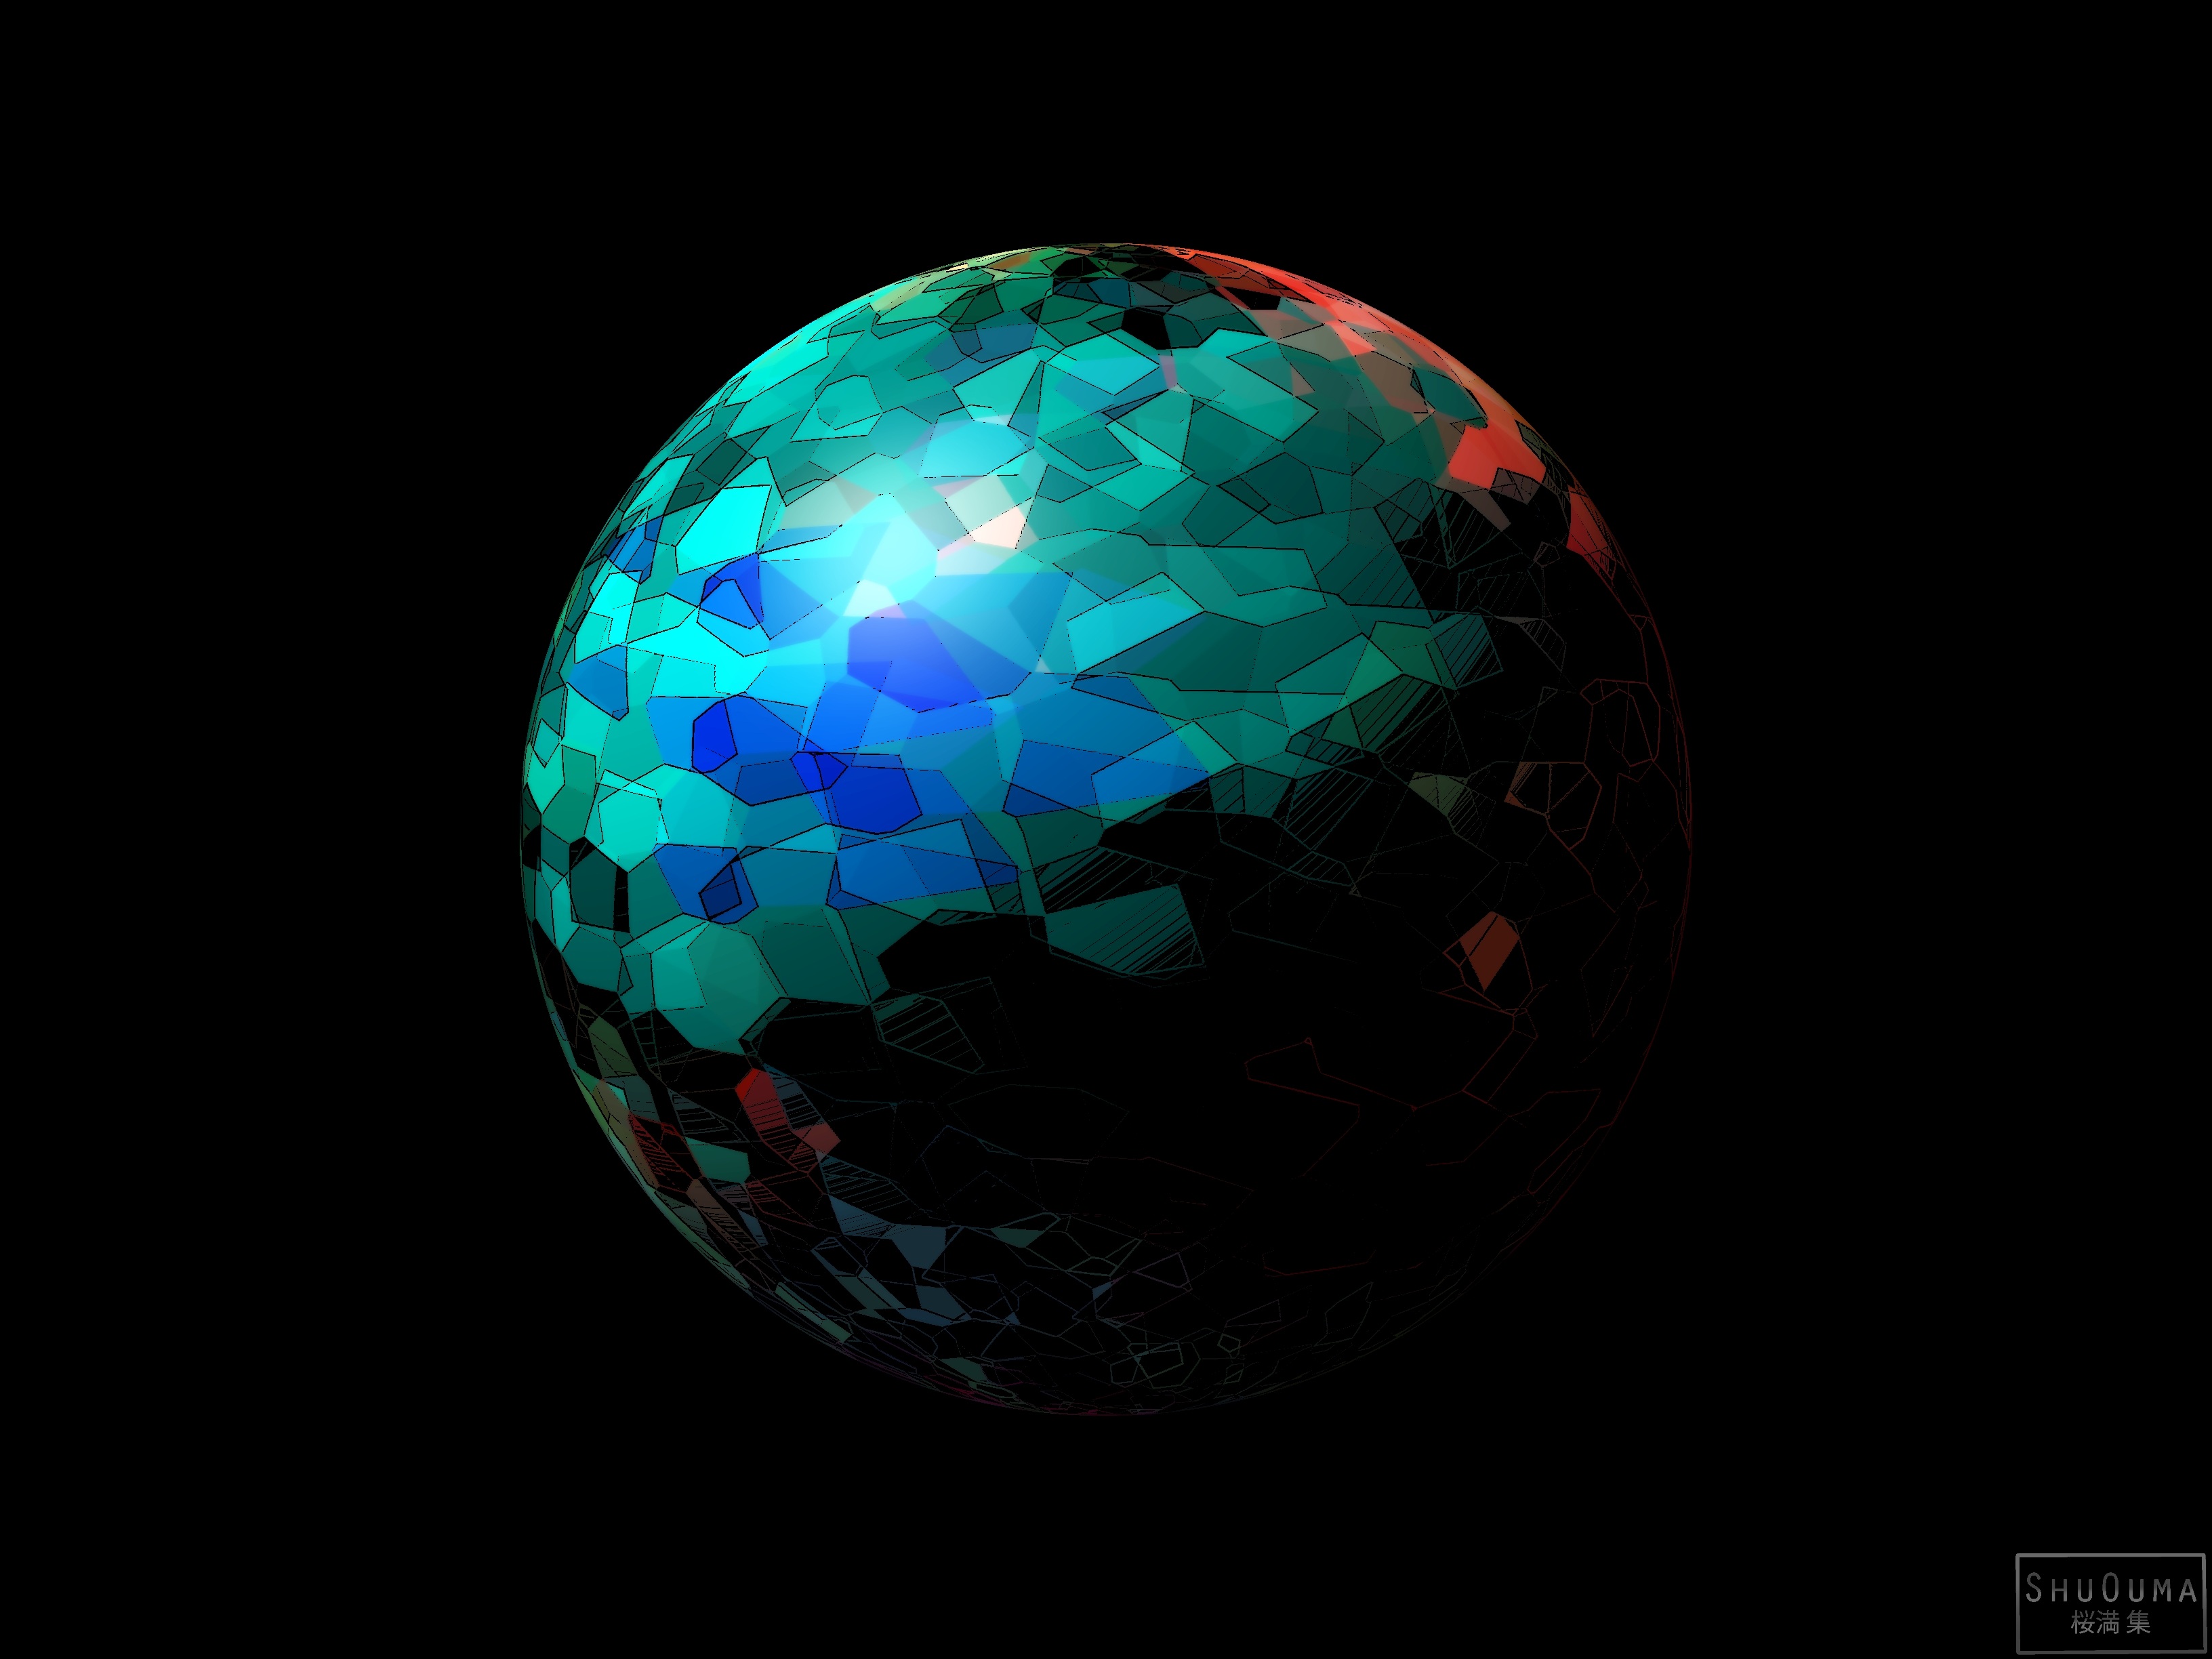 Abstract Sphere 3264x2448